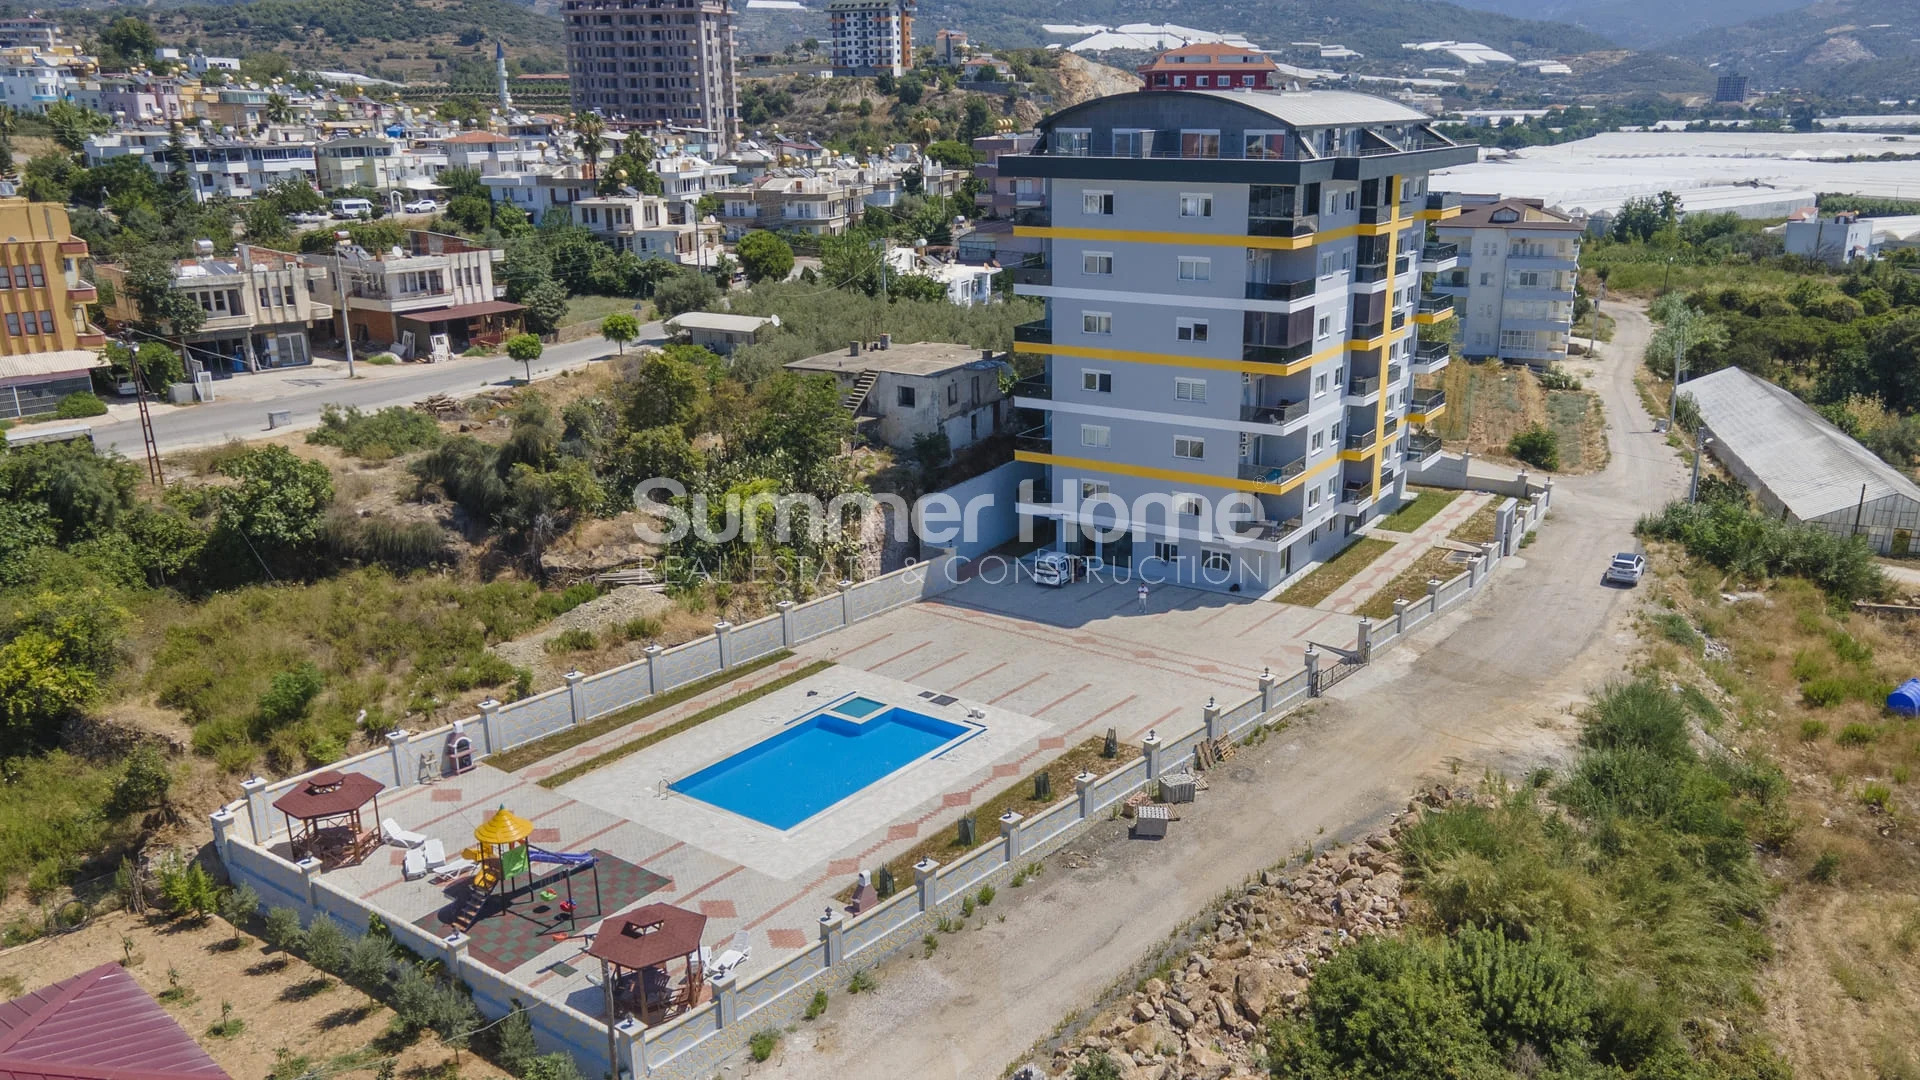 Lovely Sea View Apartments in Demirtas general - 7